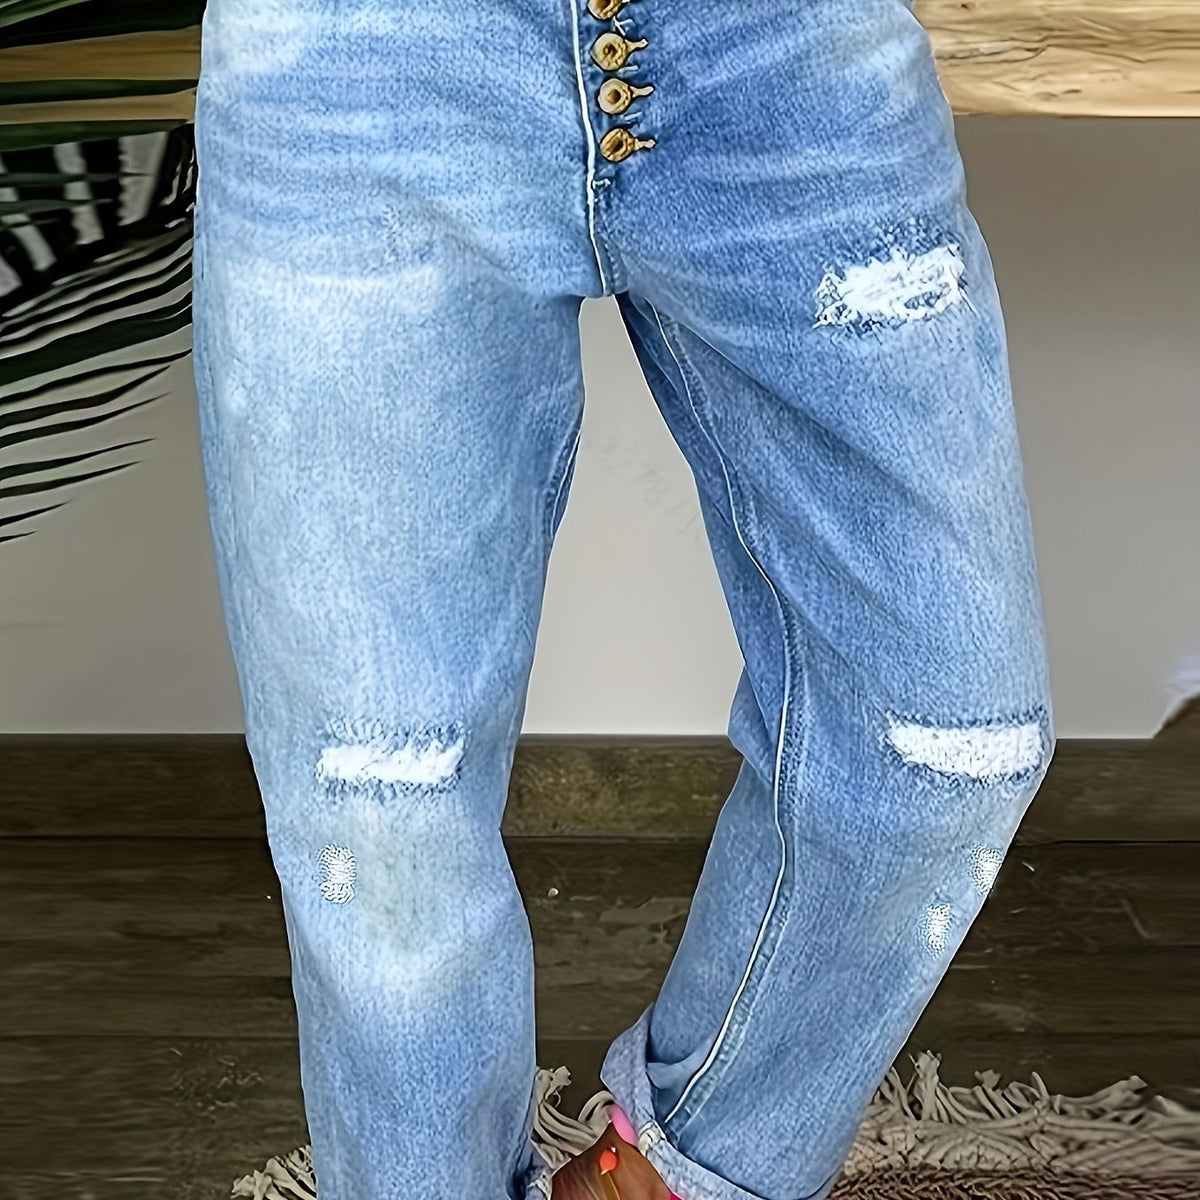 「lovevop」Blue Ripped Holes Straight Jeans, Distressed Single-Breasted Button Loose Fit Denim Pants, Women's Denim Jeans & Clothing